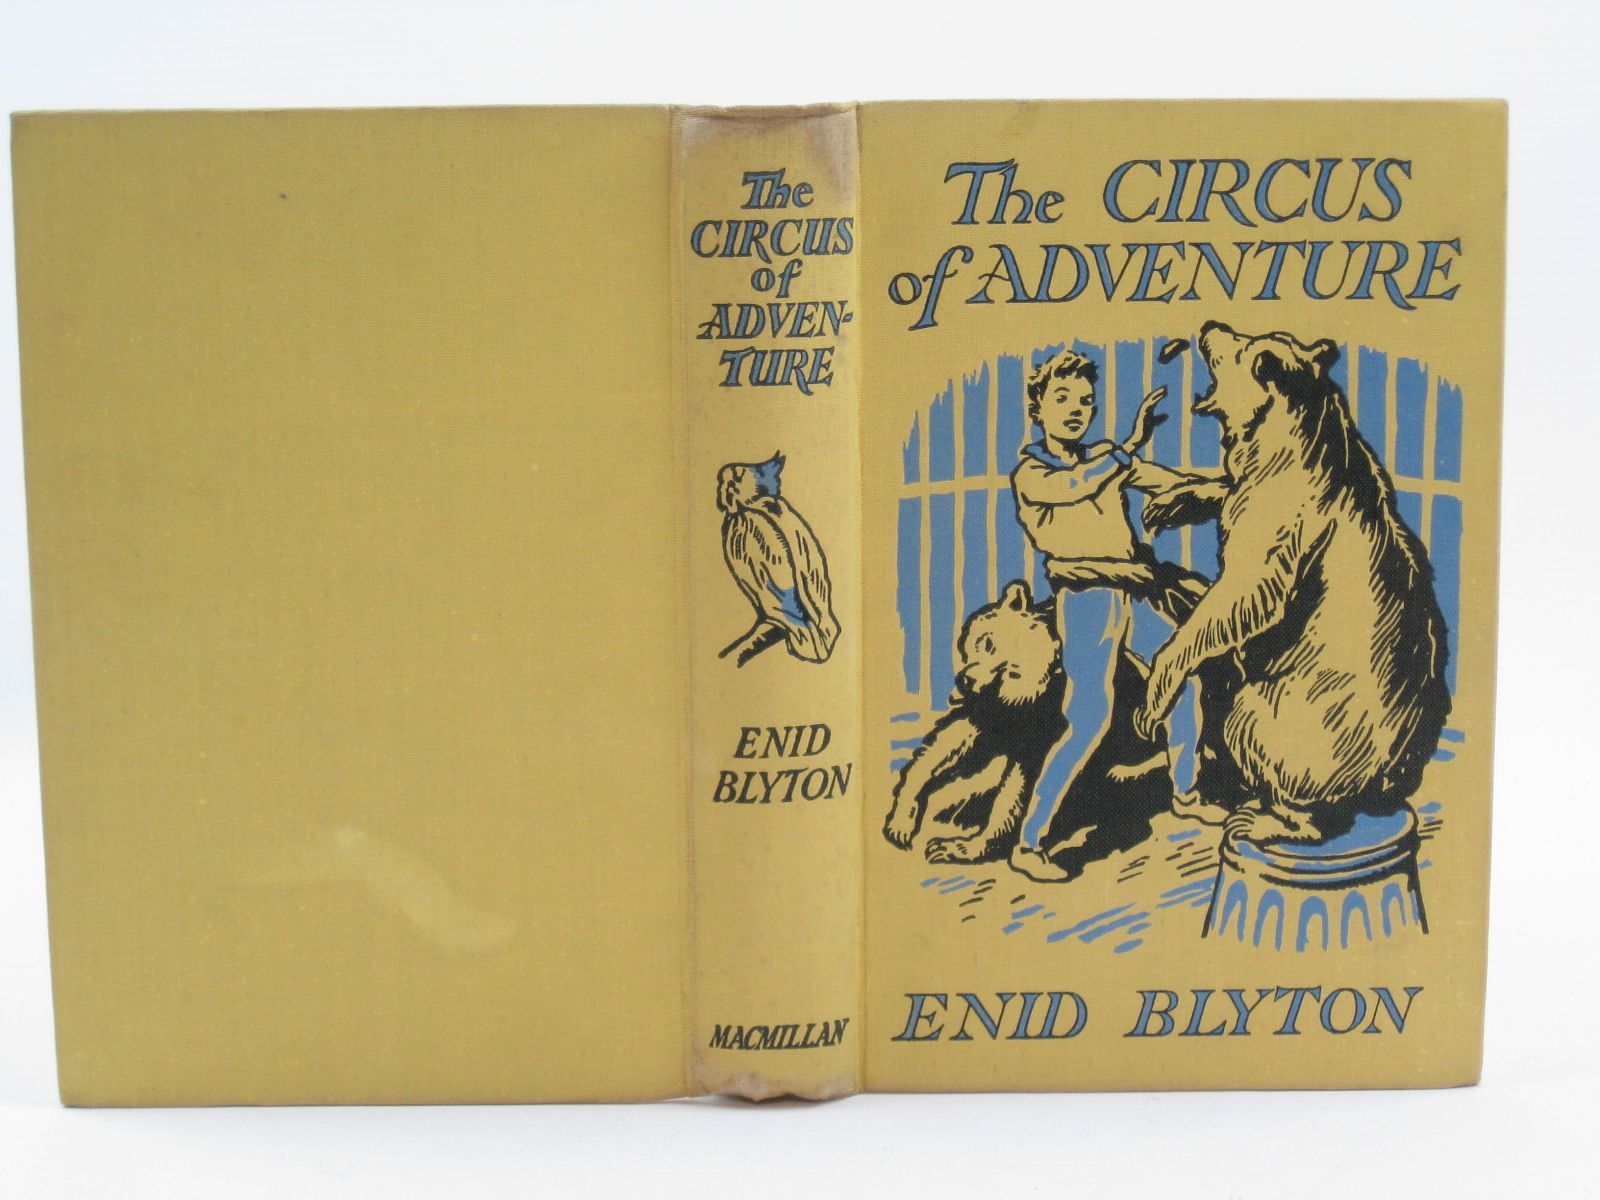 Photo of THE CIRCUS OF ADVENTURE written by Blyton, Enid illustrated by Tresilian, Stuart published by Macmillan & Co. Ltd. (STOCK CODE: 1316496)  for sale by Stella & Rose's Books